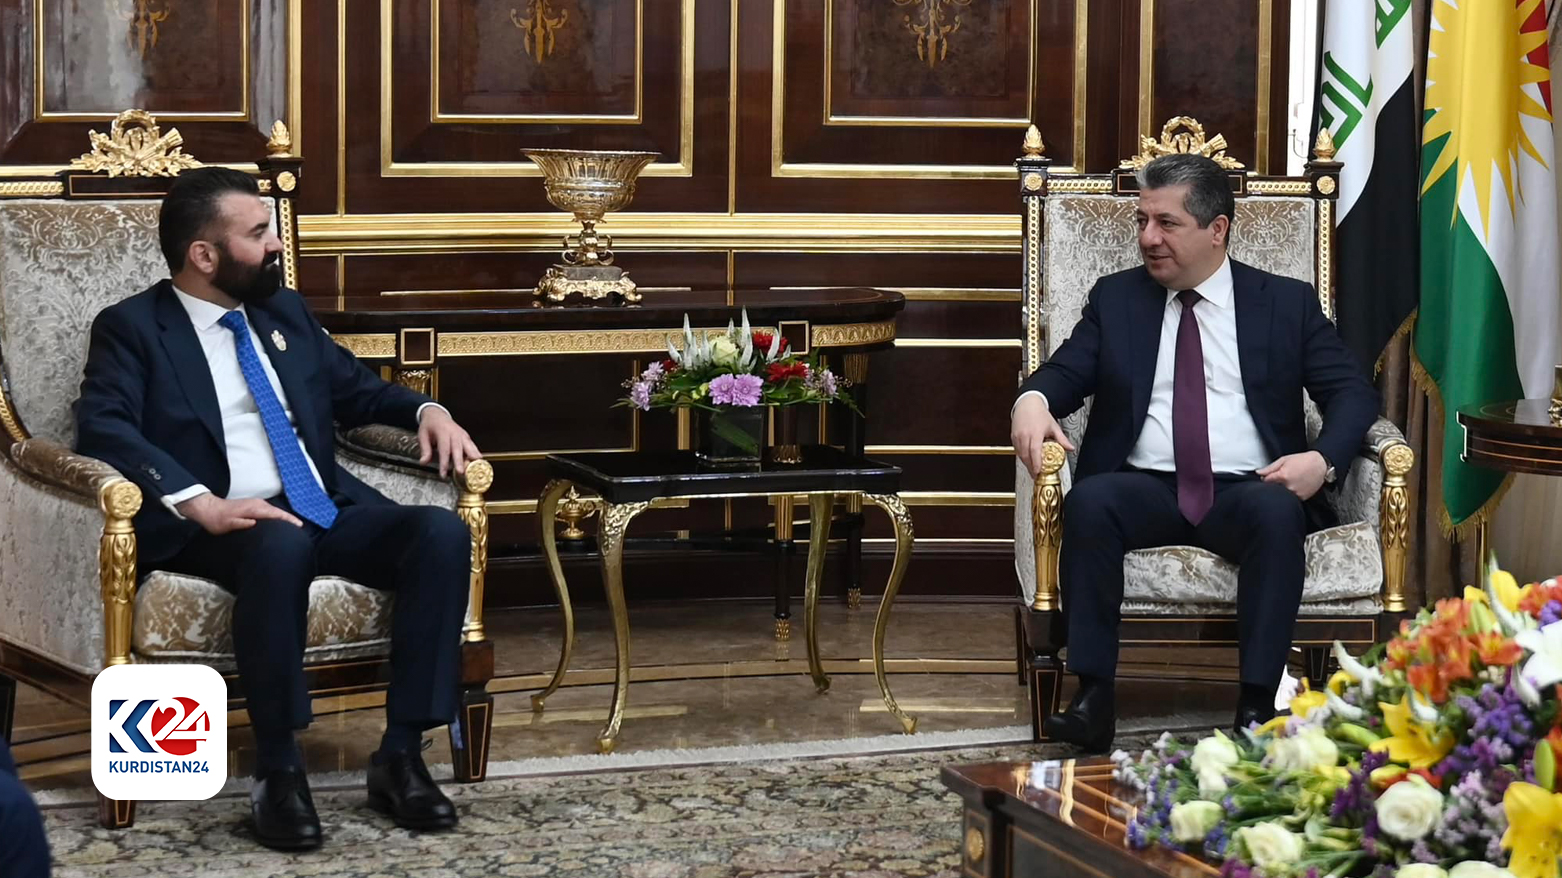 On National Day Romanowski congratulates alMaliki reaffirms support for Iraqs stability